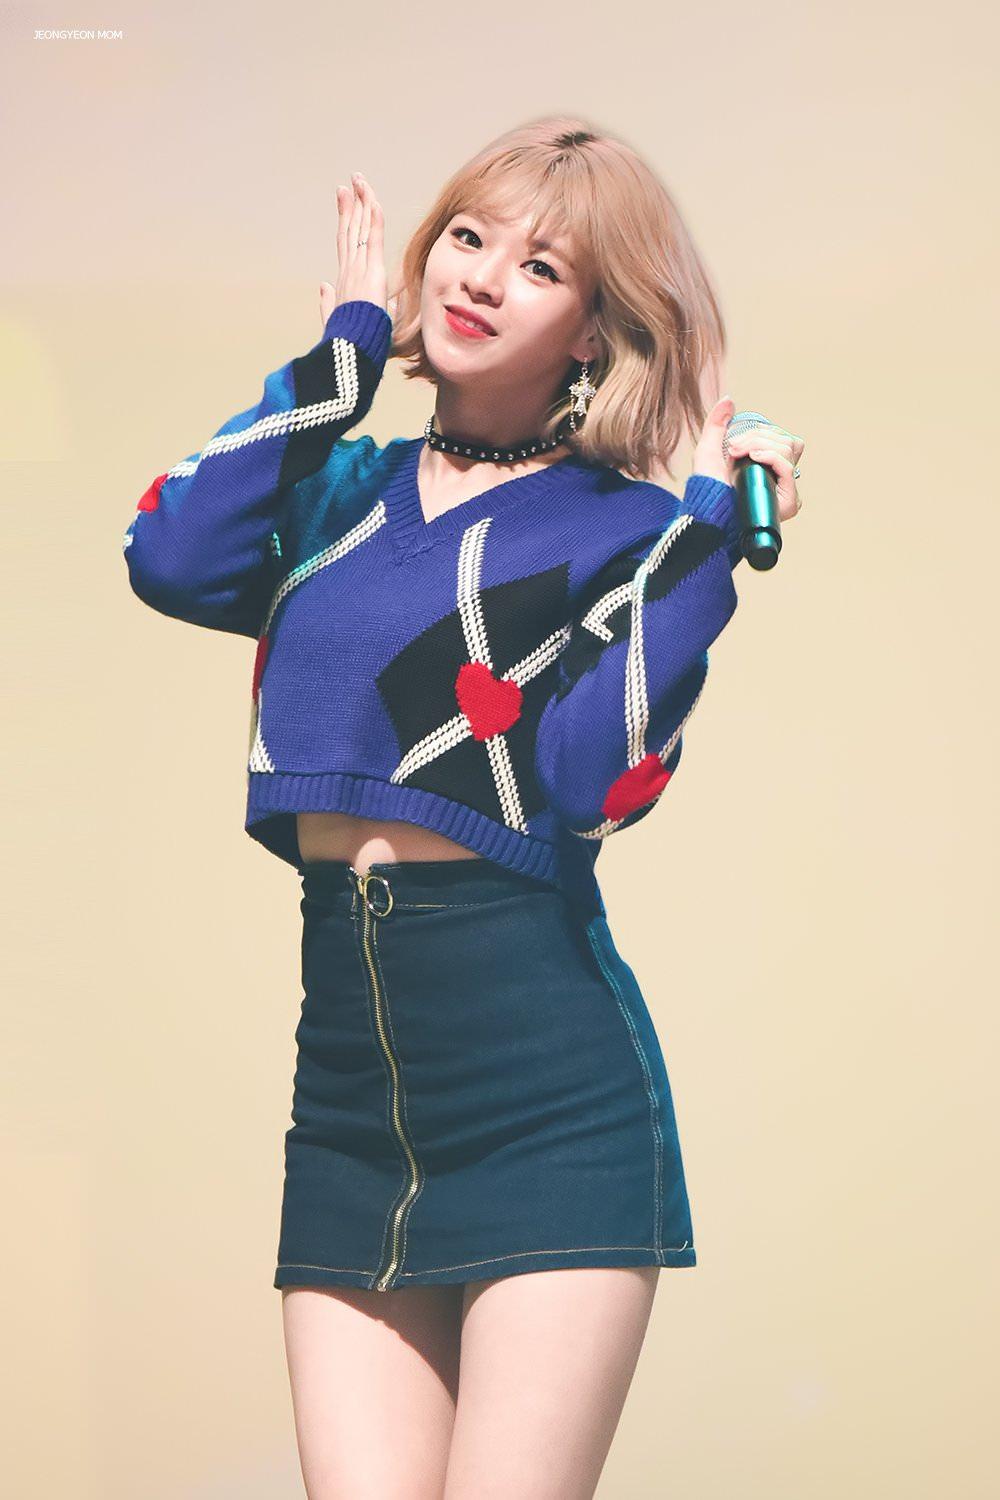 What are your top twice phone wallpaper?